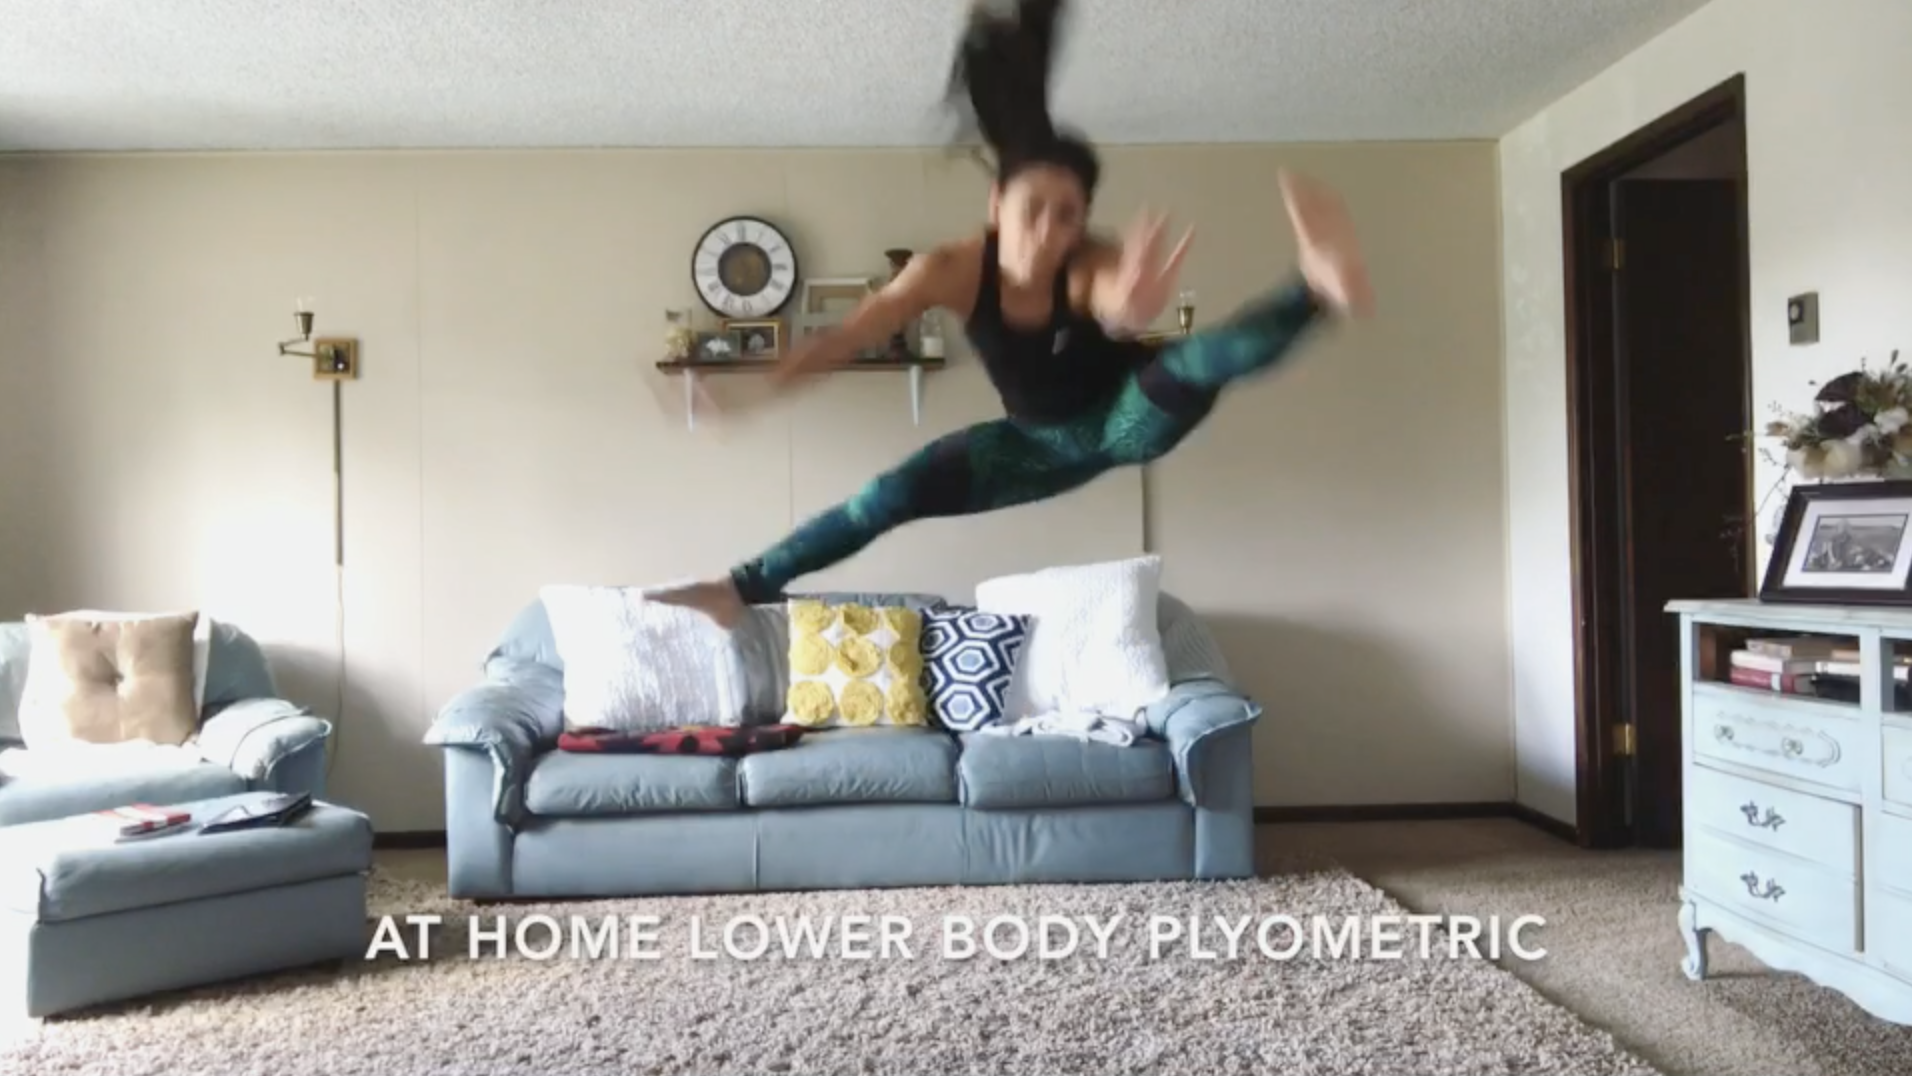 At home cardio workout with bodyweight plyometric exercises